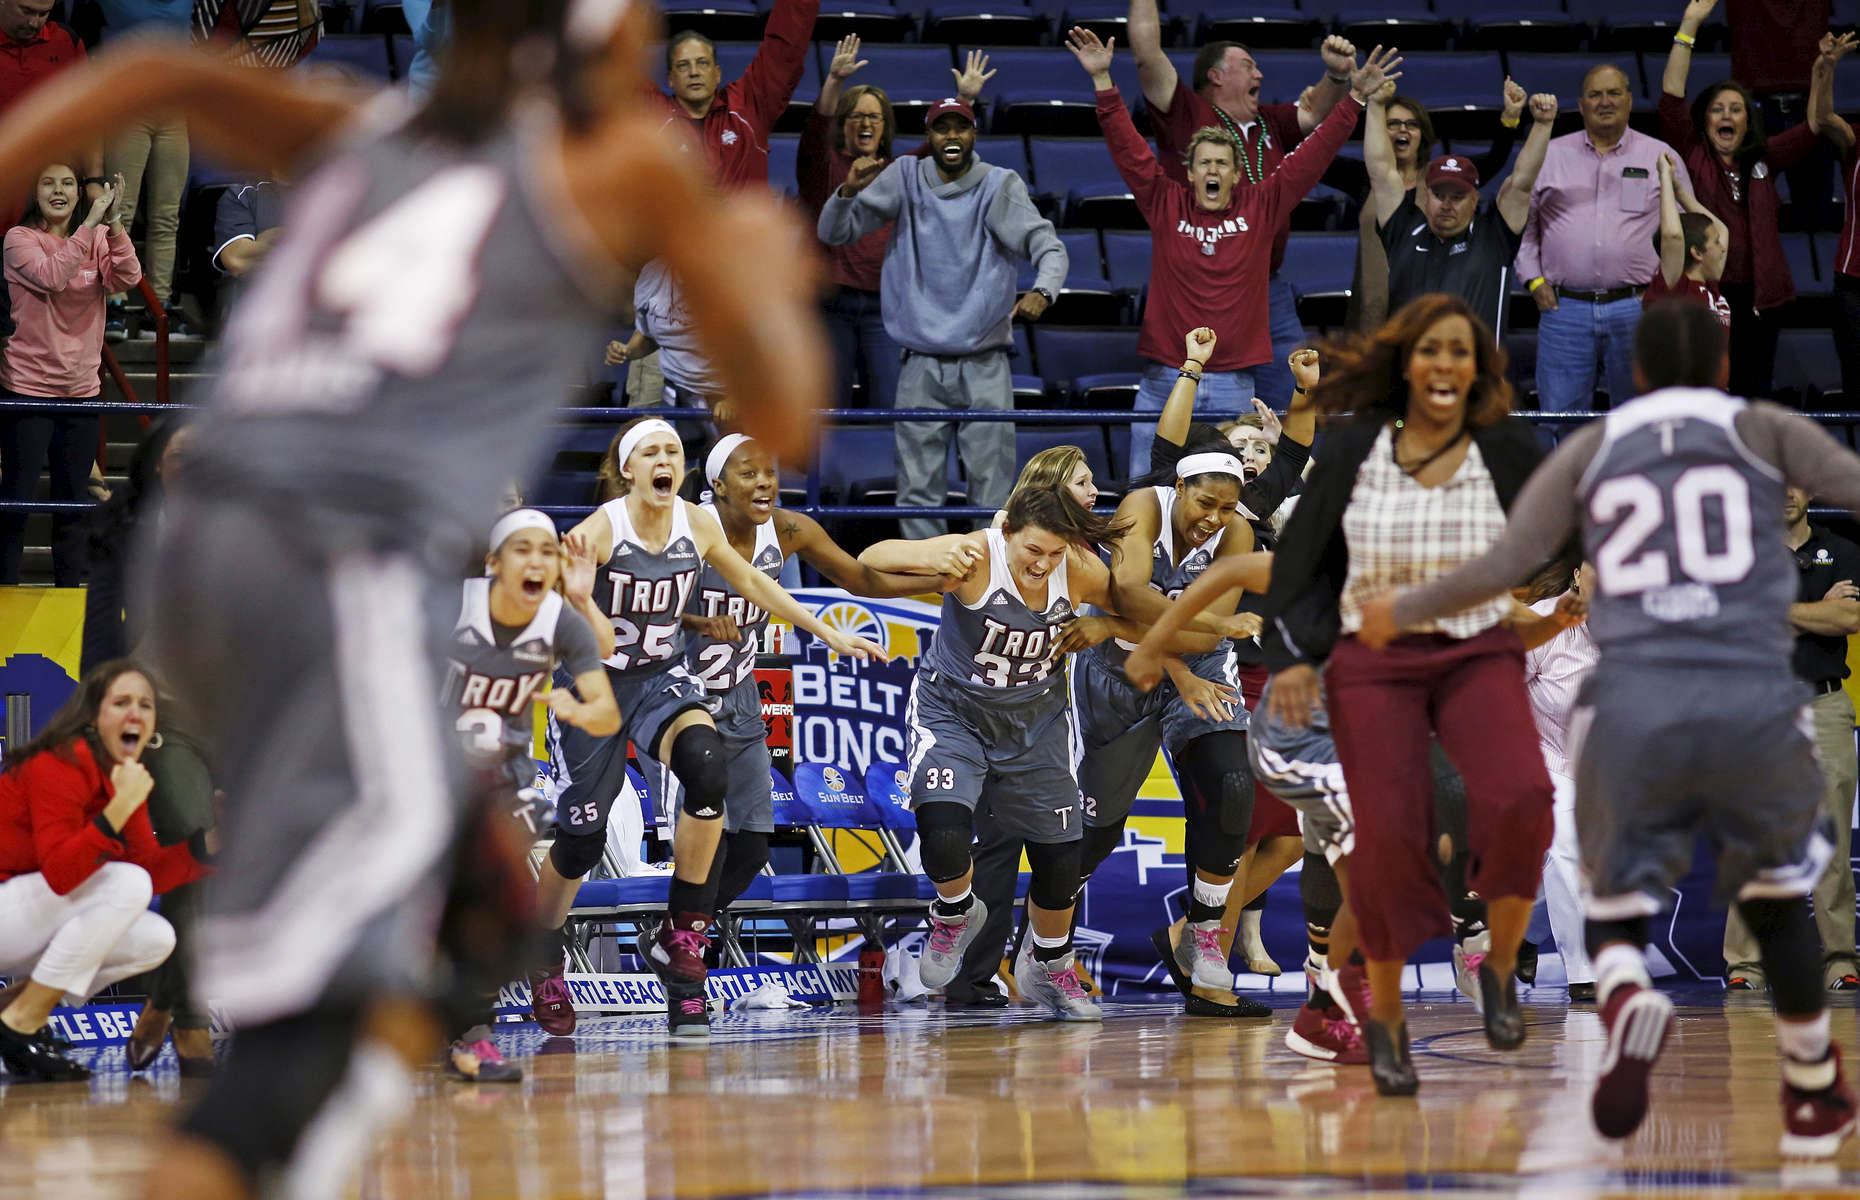 The Troy bench explodes in celebration after beating Arkansas Little Rock during an NCAA college basketball game in the championship of the Sun Belt Conference women's tournament in New Orleans, Saturday, March 12, 2016. Troy won 61-60 after guard Ashley Beverly Kelley scored with 20.2 seconds on the clock. (AP Photo/Max Becherer)